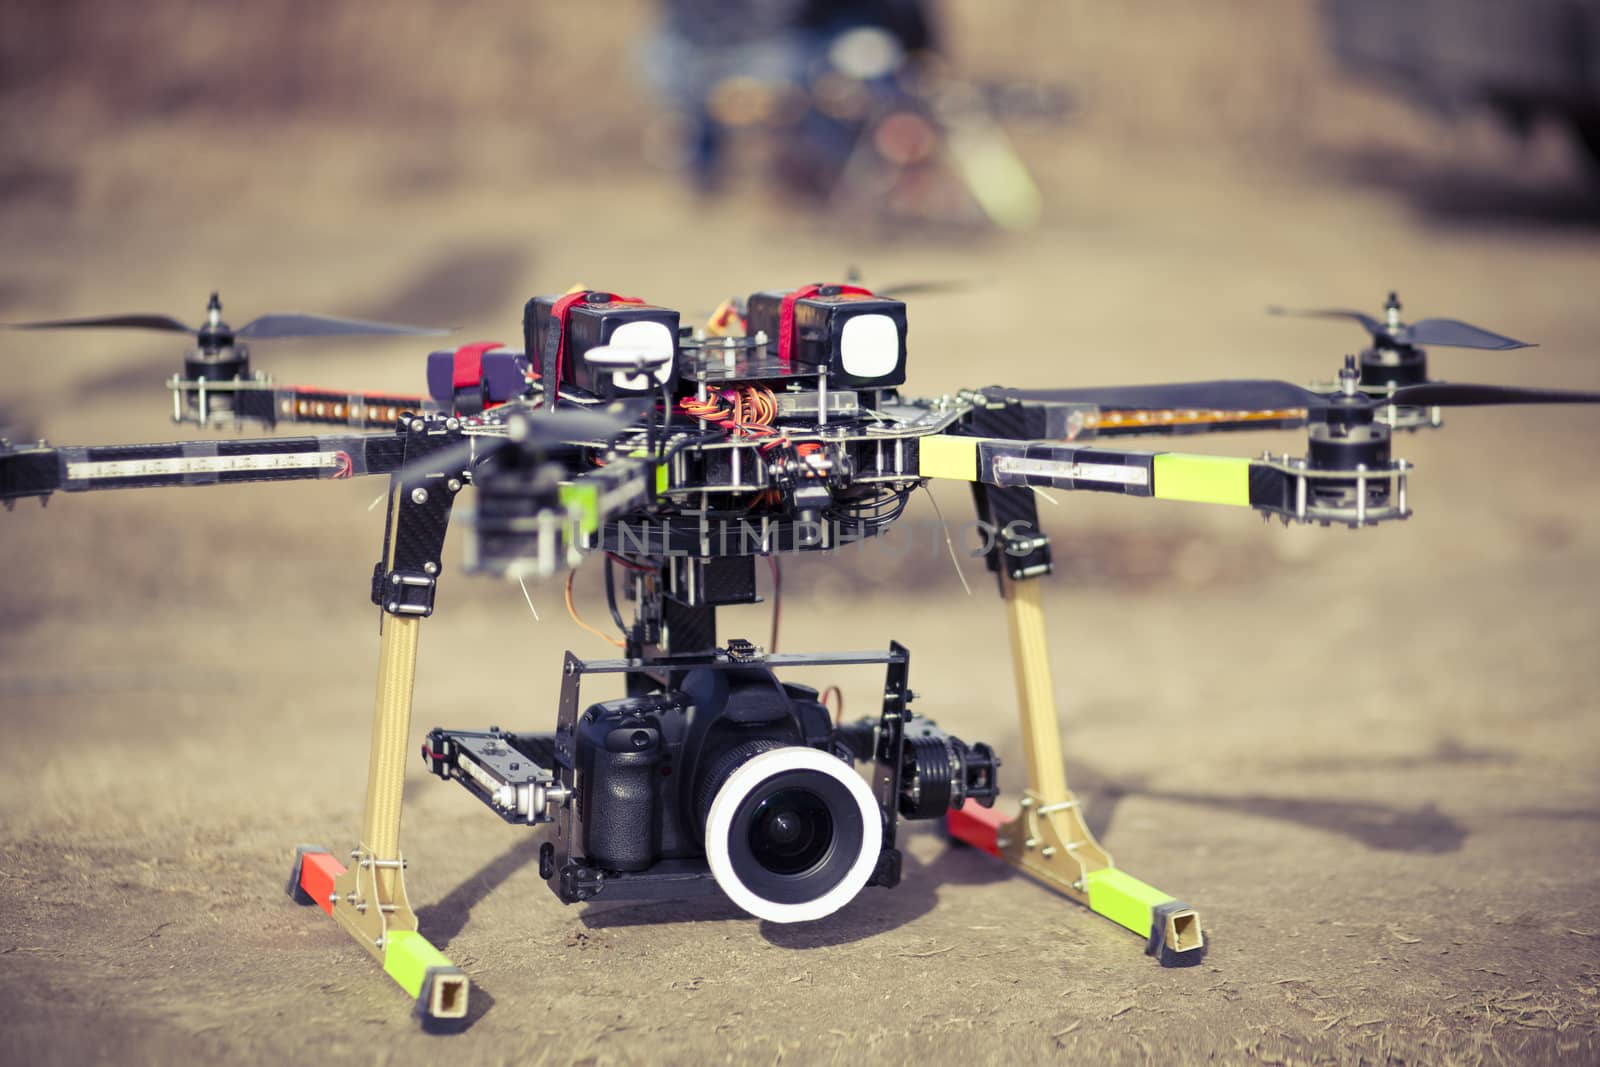 Preparing to take aero photo using octocopter flying drone